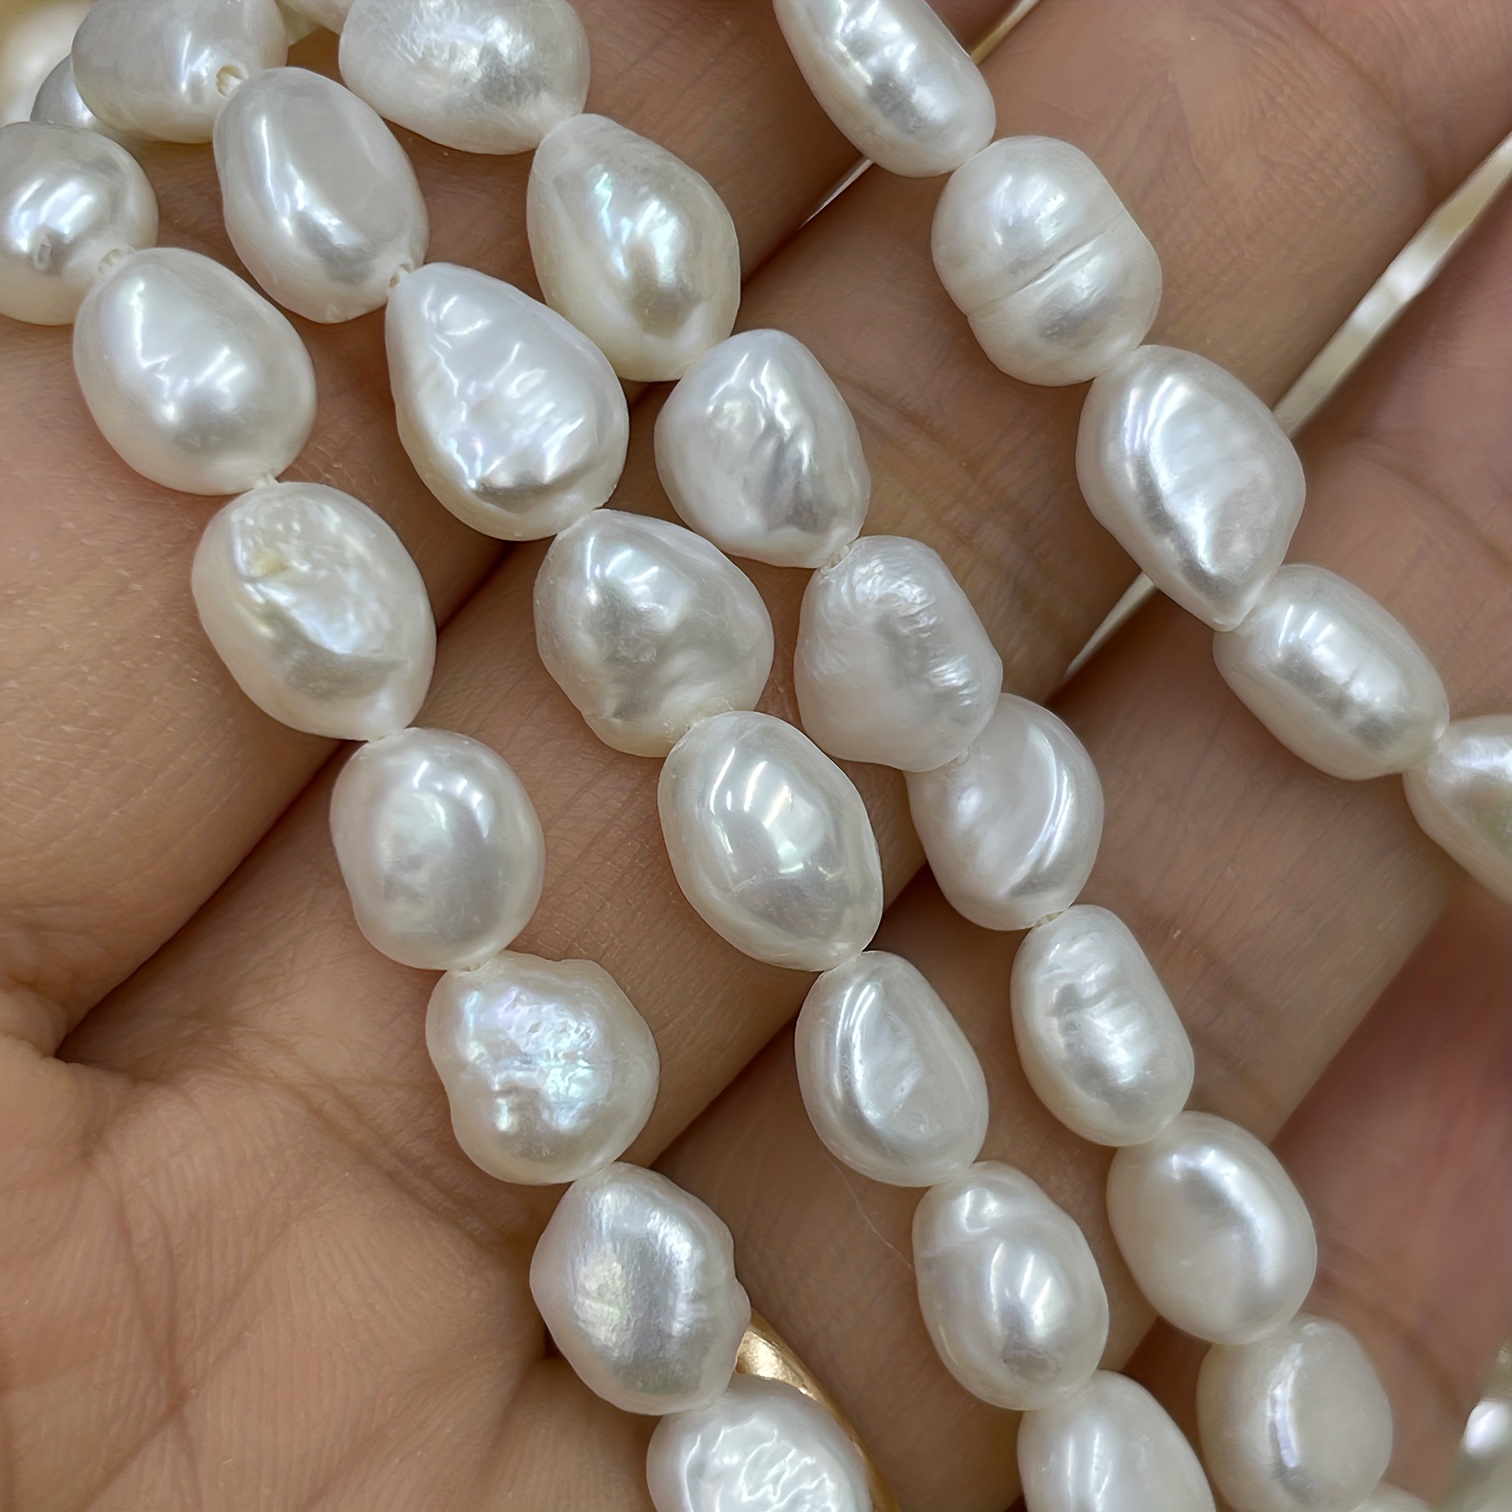 2400PCS Pearl Beads for Jewelry Making 48 Colorful 6mm Round Pearl Beads  for Bracelets Making Kit Small Pearl Filler Beads for DIY Craft Necklace